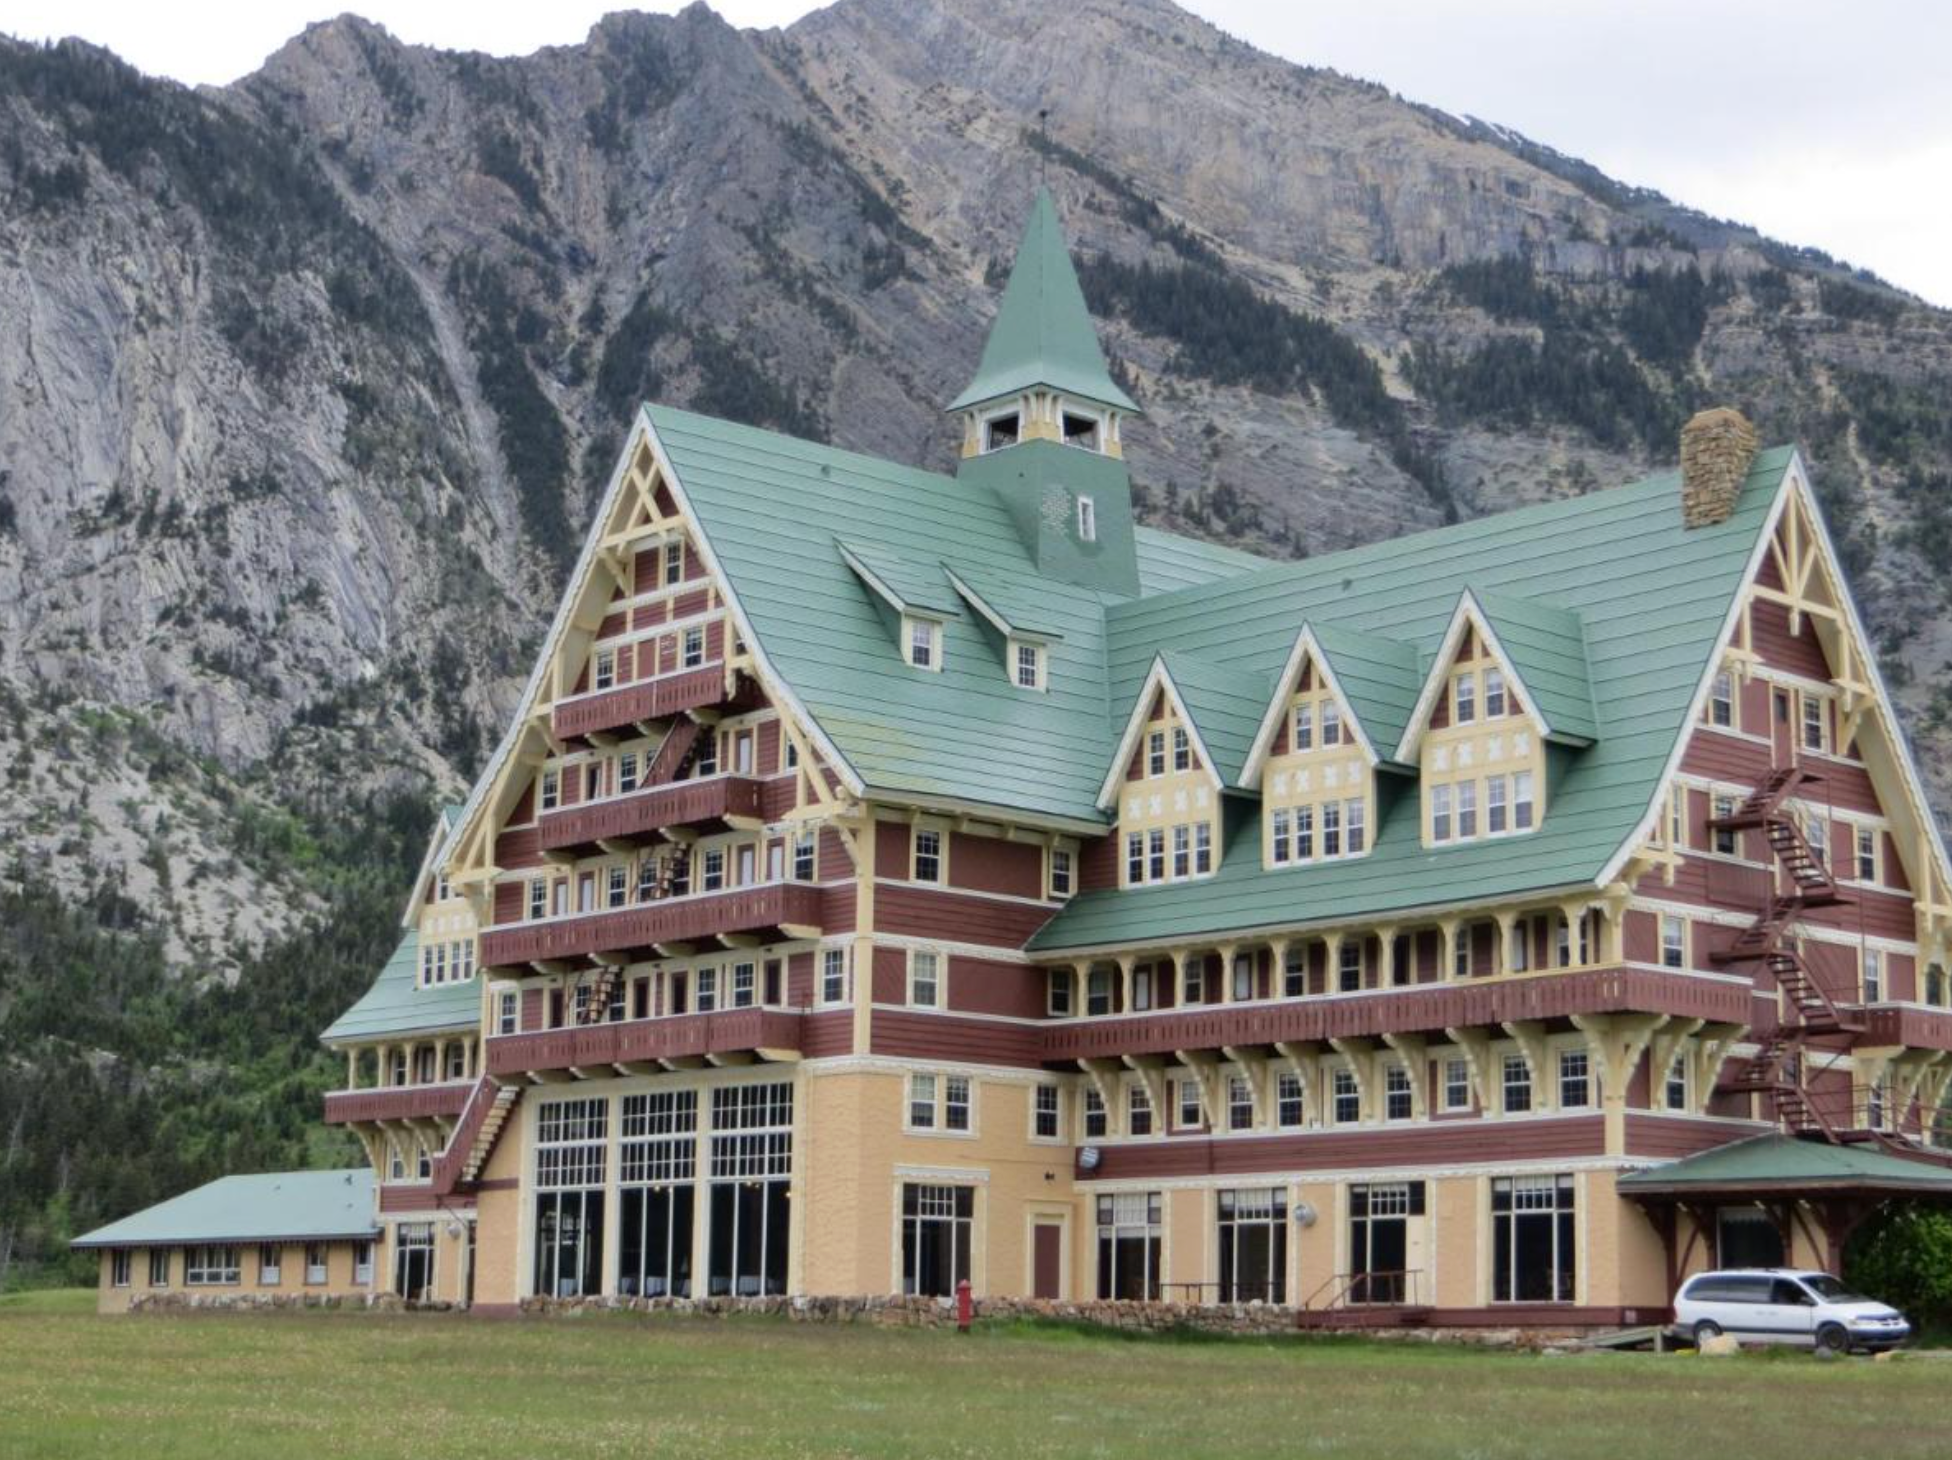 4. Prince of Wales Hotel